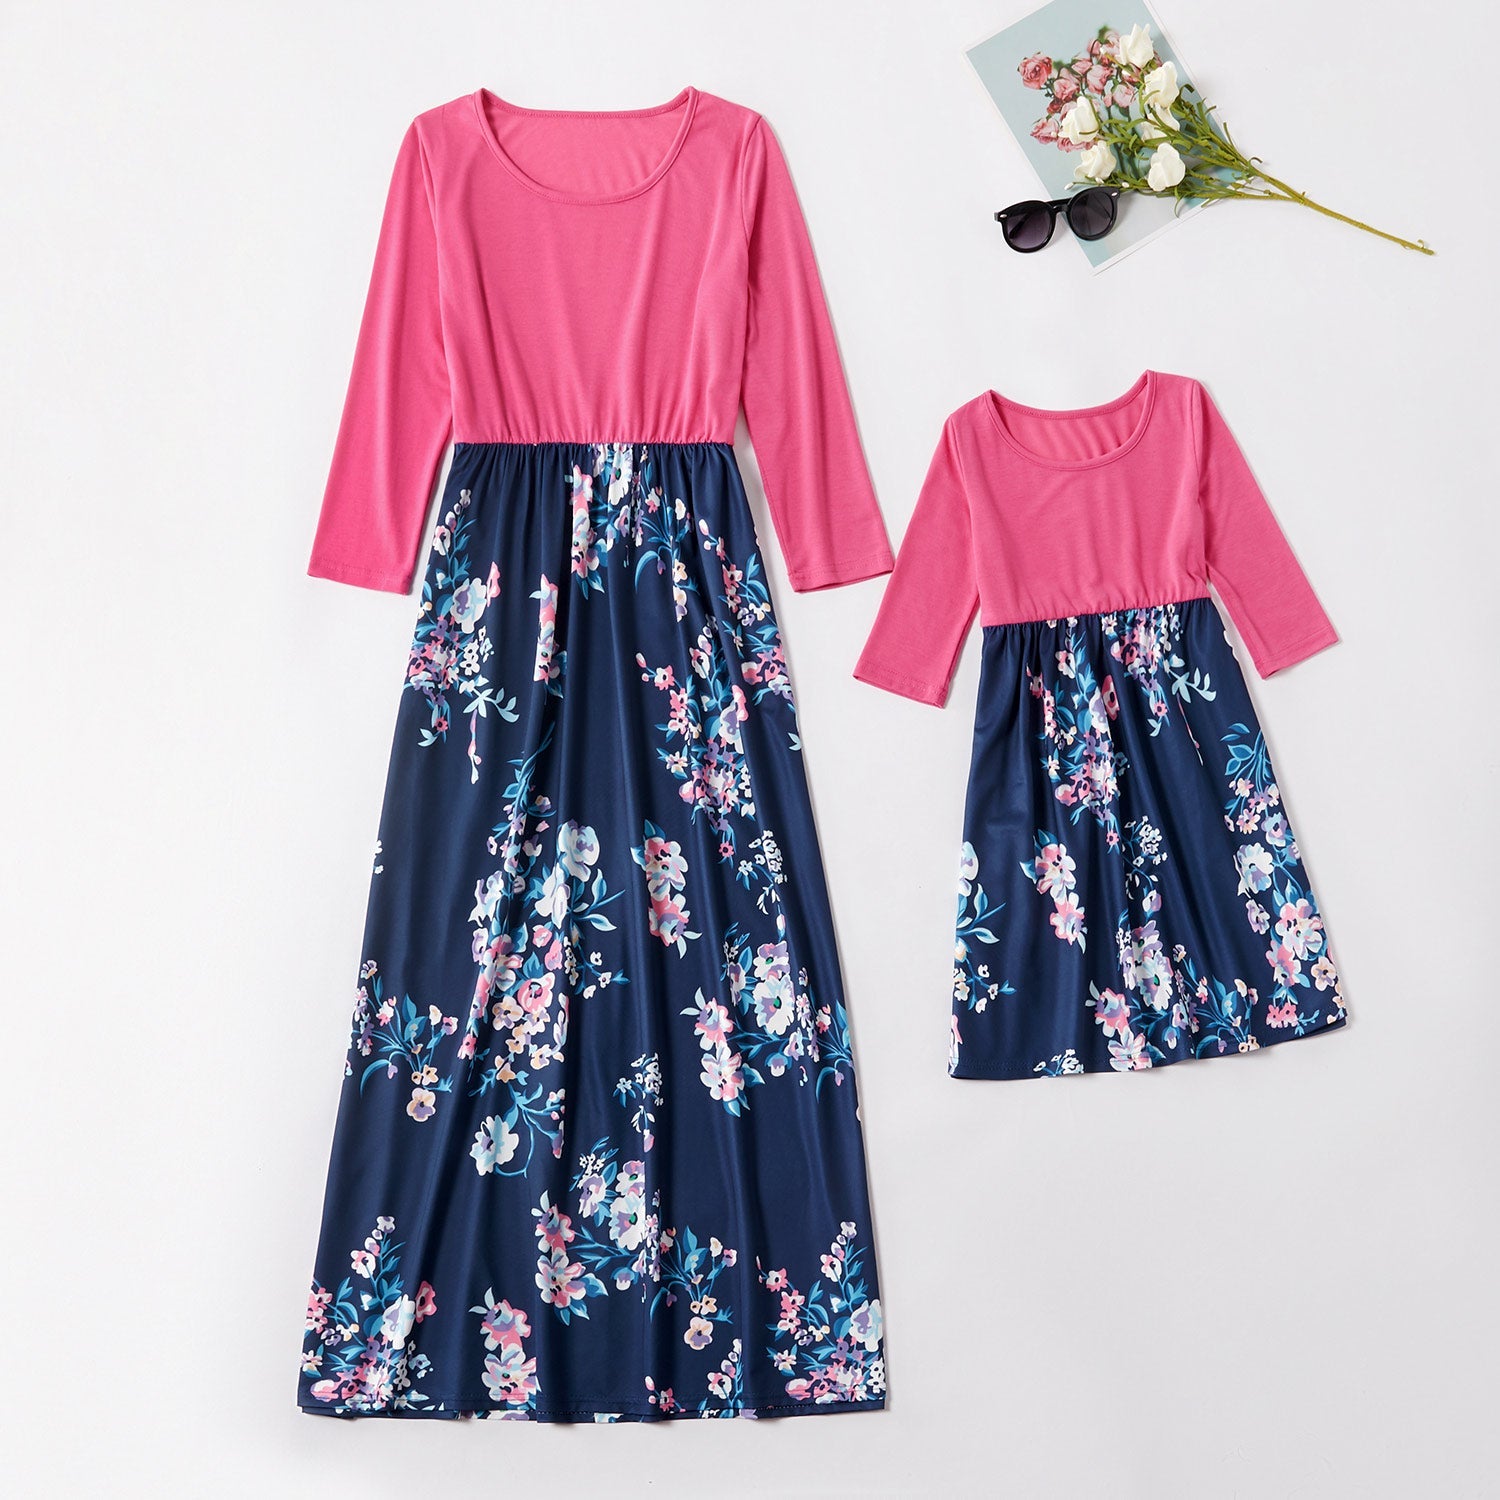 Pink Long Sleeve Floral Dress for Mom and Me Q2008-016